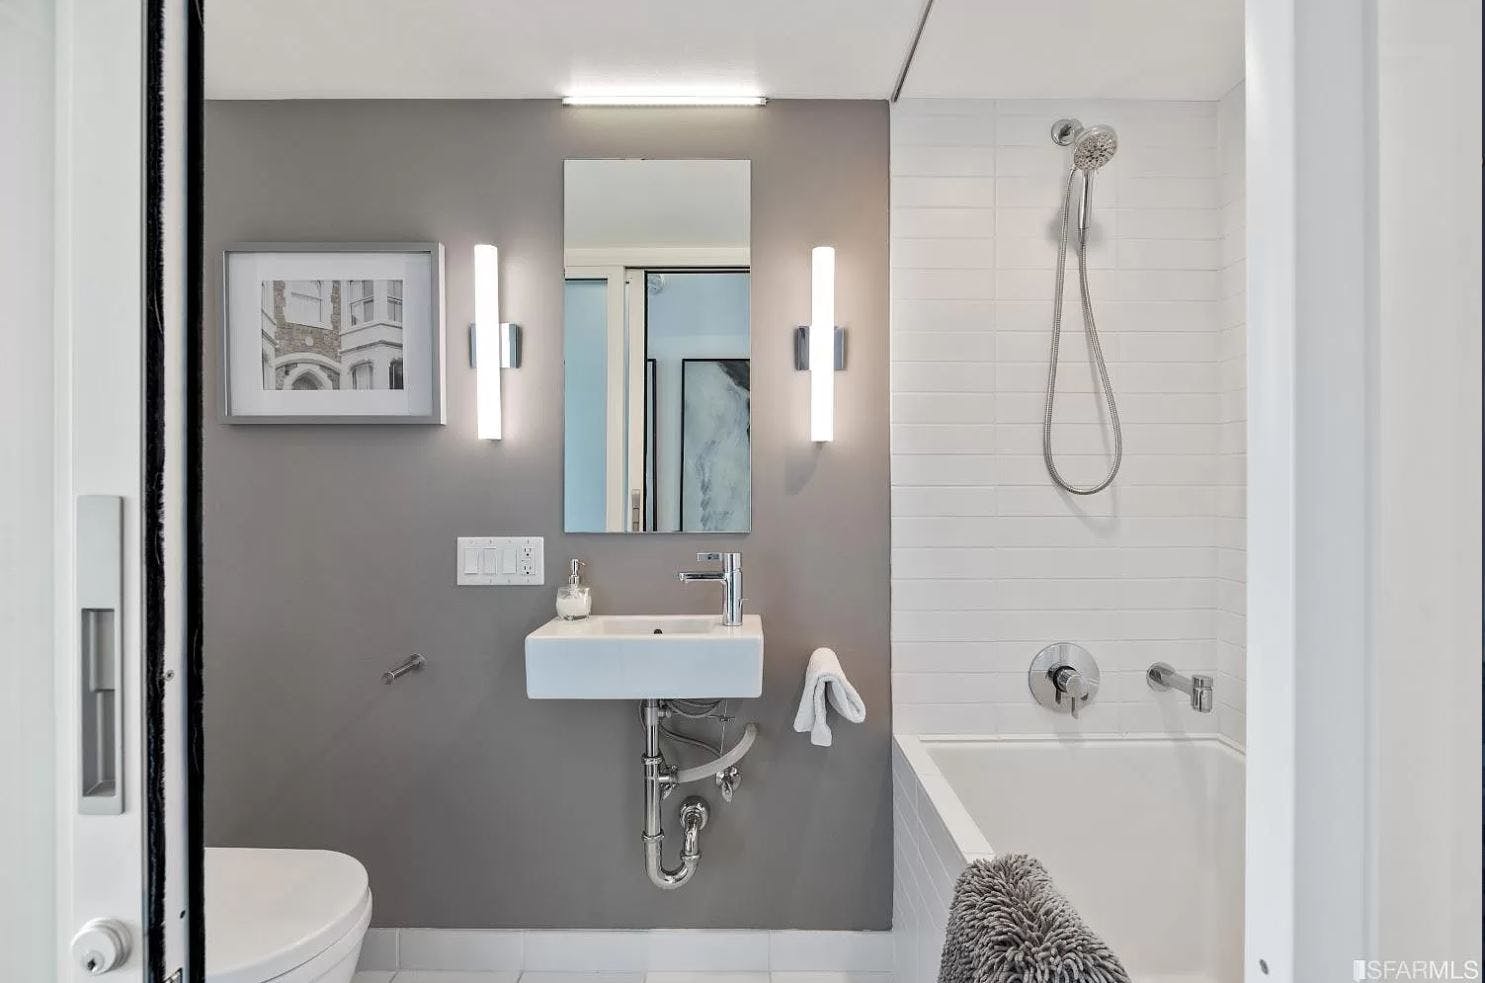 The tiled bathrooms in 8 Octavia are modern, spaciously designed, and sleek in appearance. 